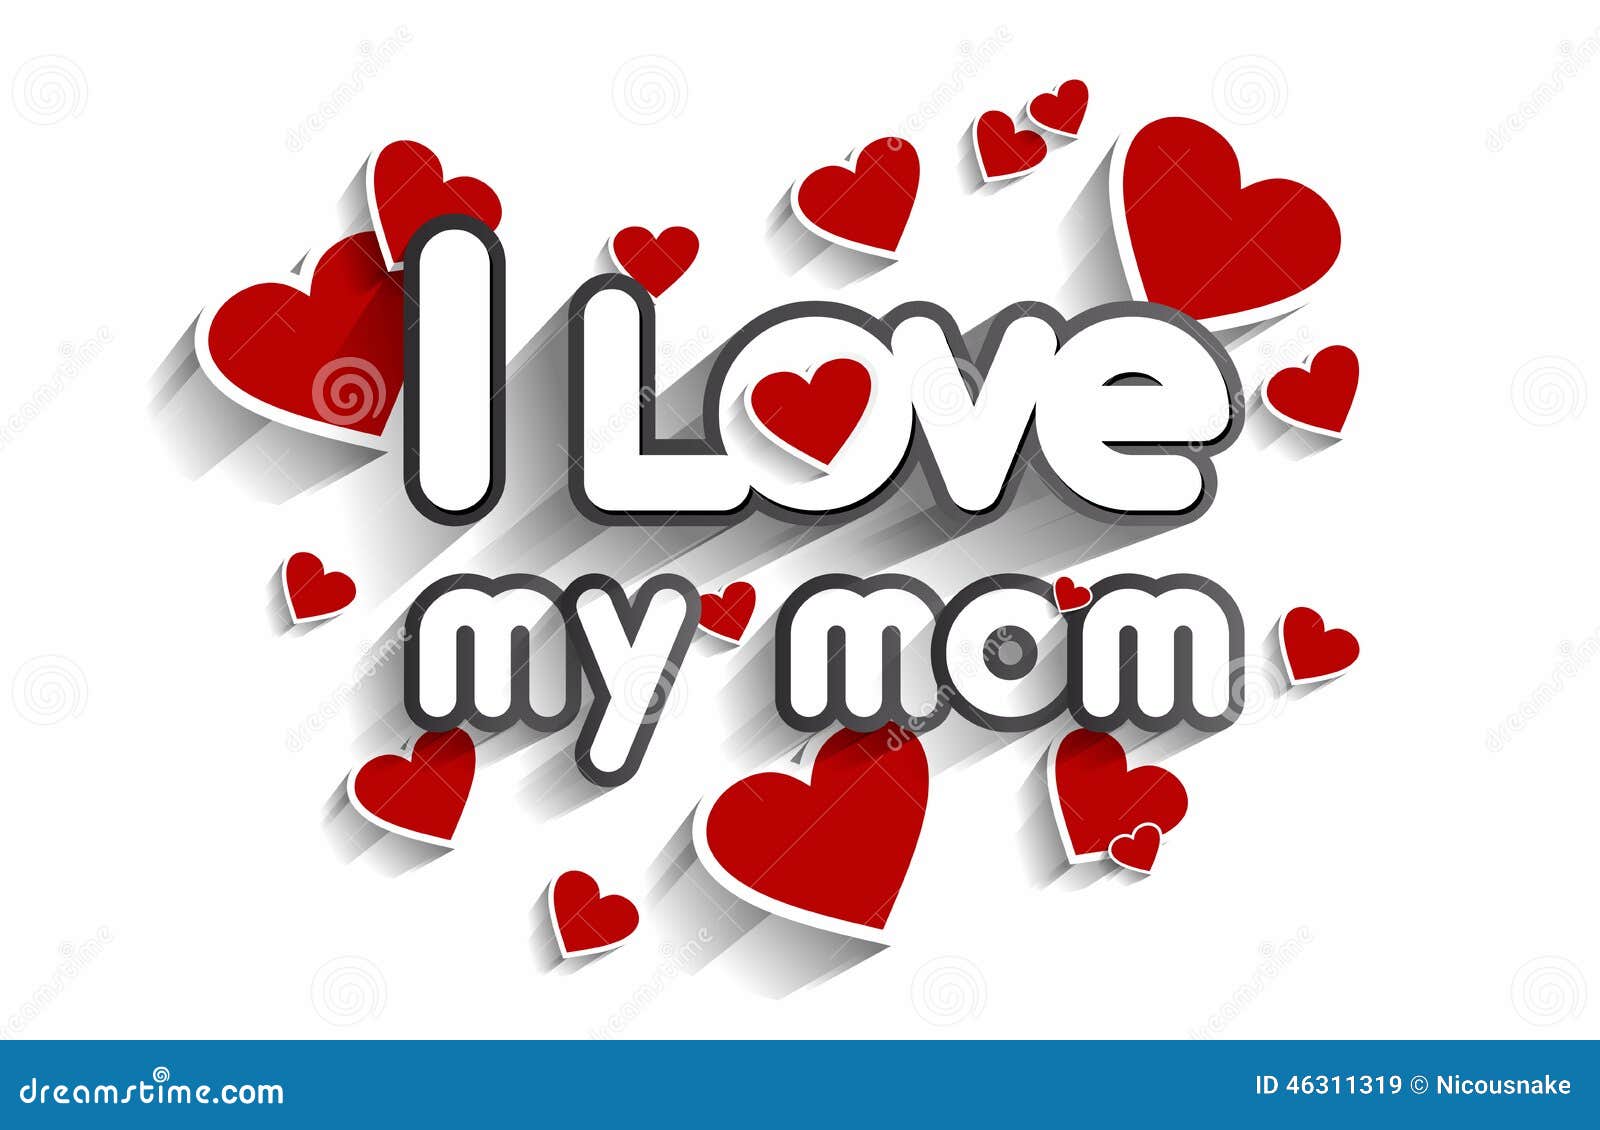 I Love My Mom stock vector. Illustration of happiness - 46311319